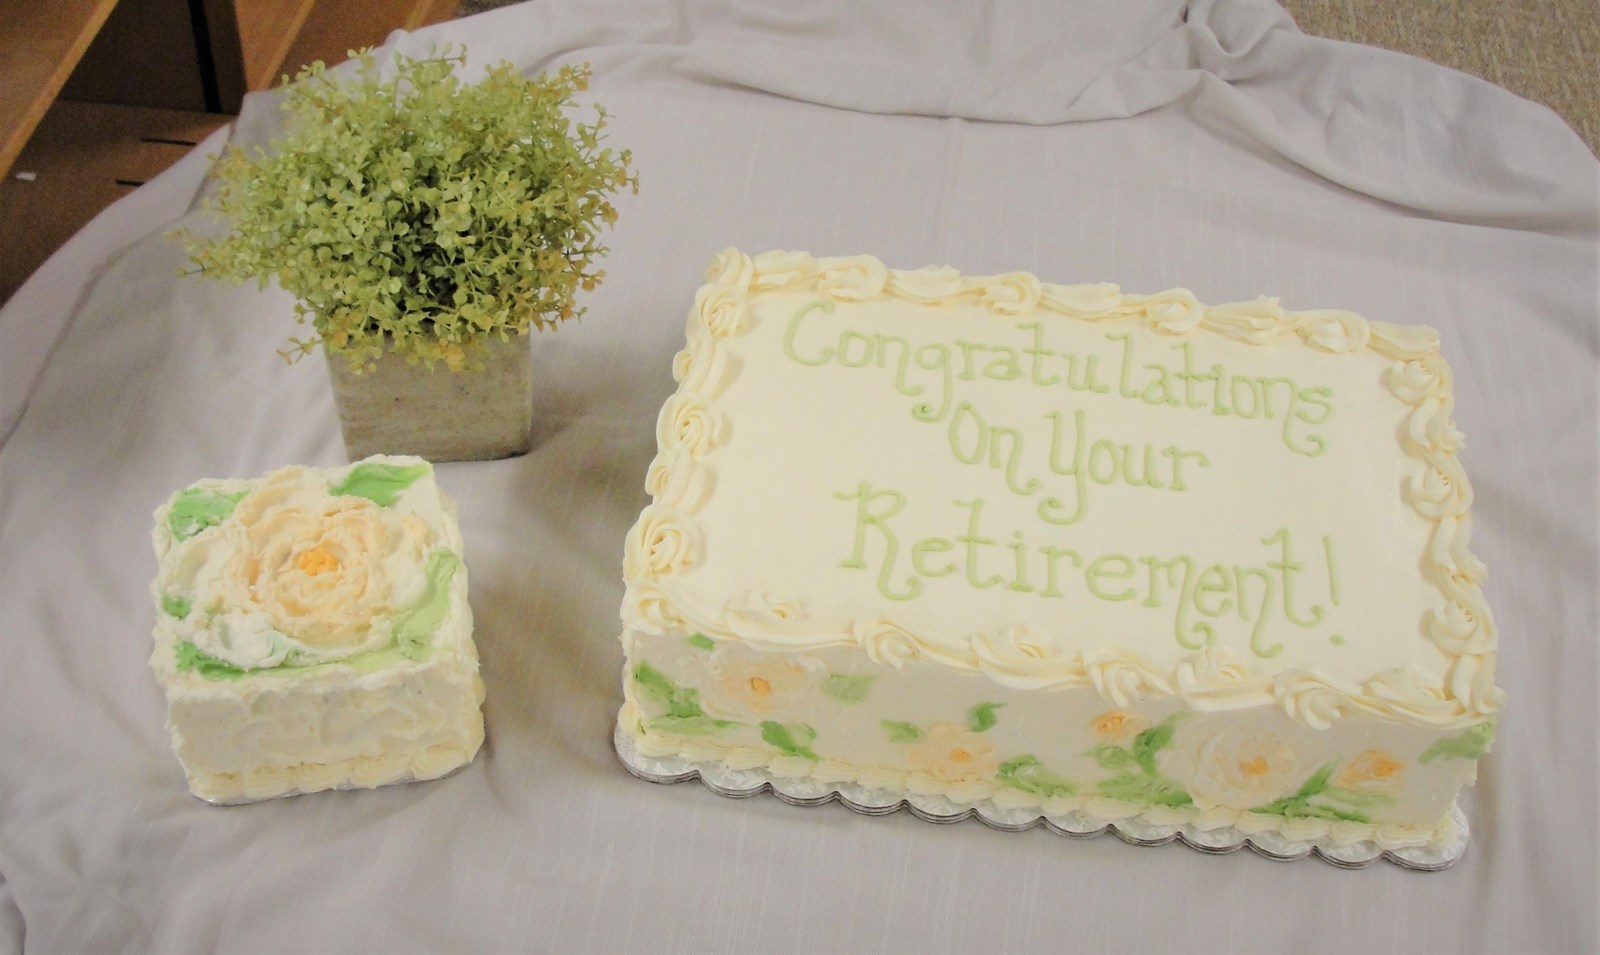 Two Cakes "Congratulations on Your Retirement!"